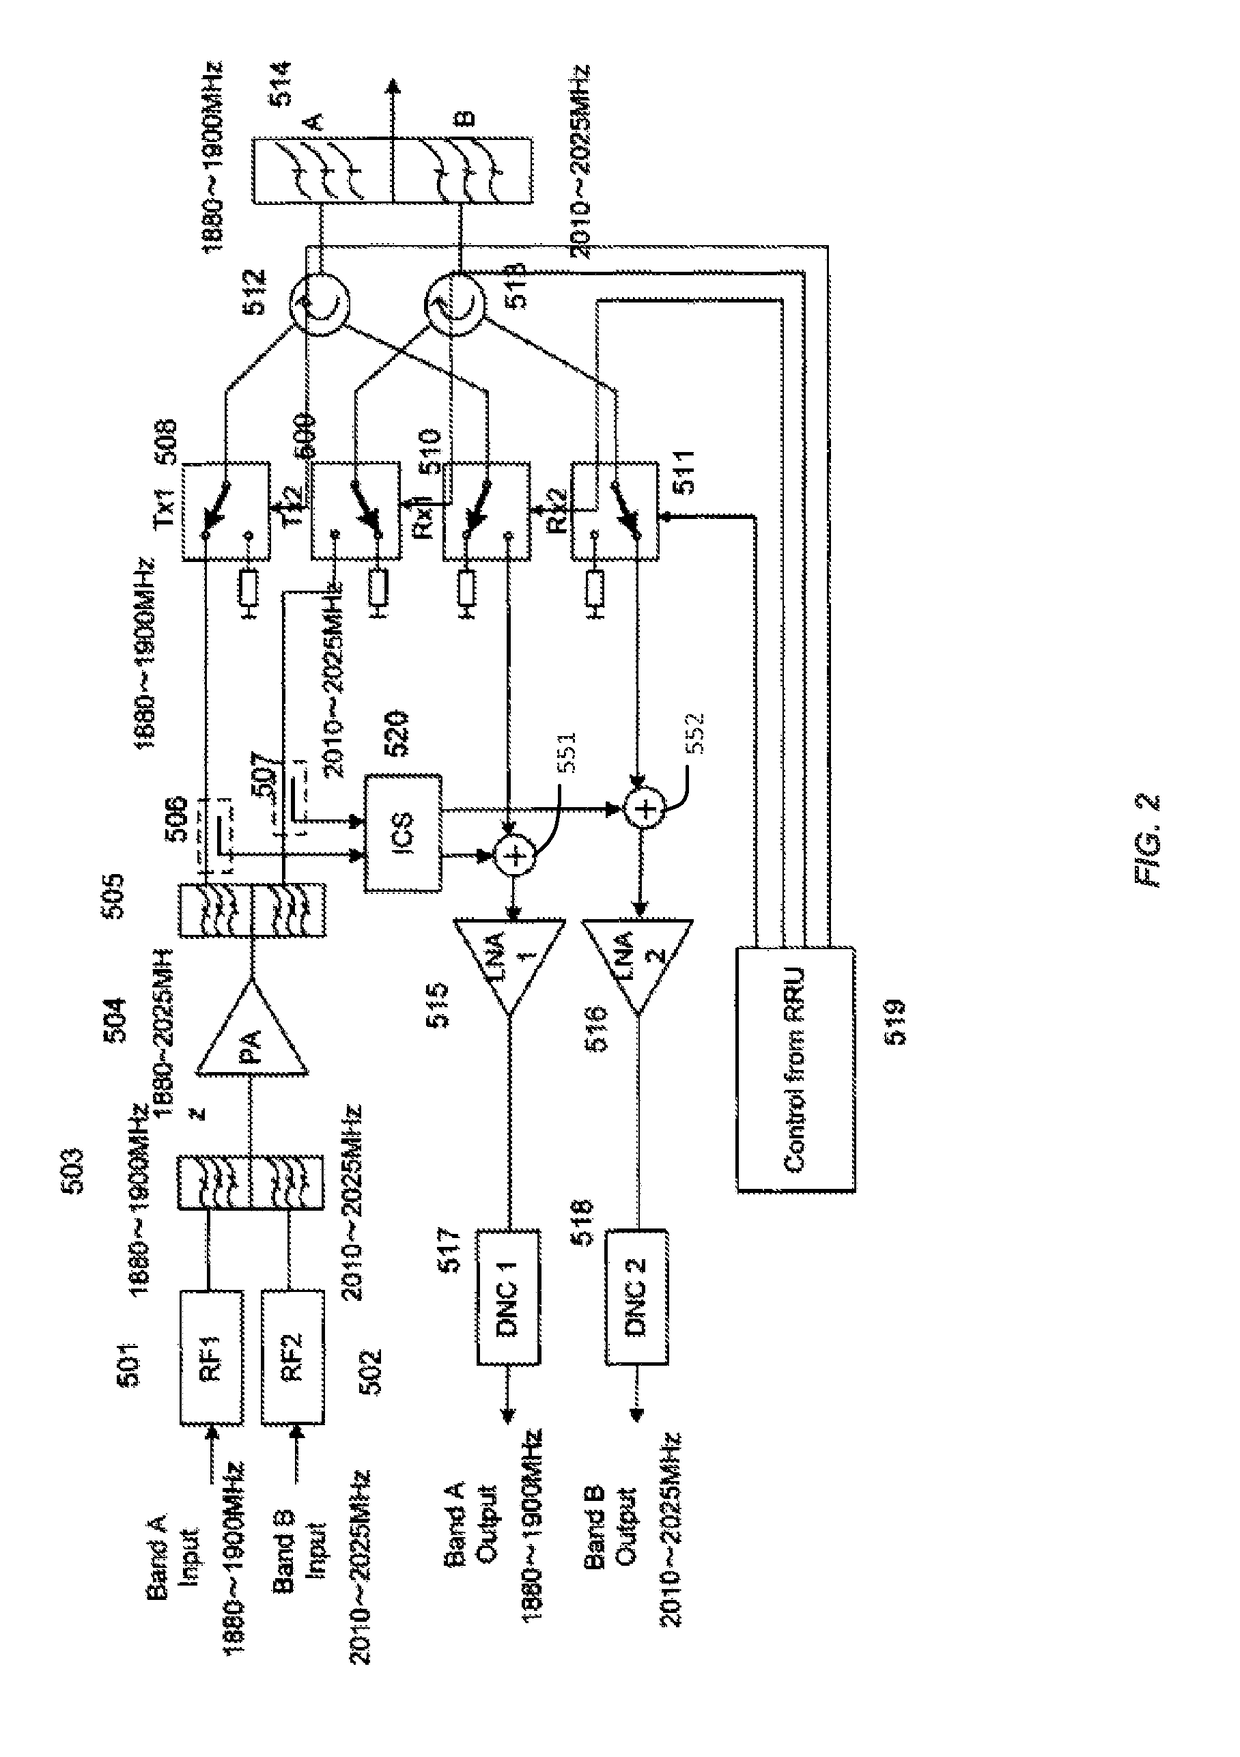 Remote radio head unit system with wideband power amplifier